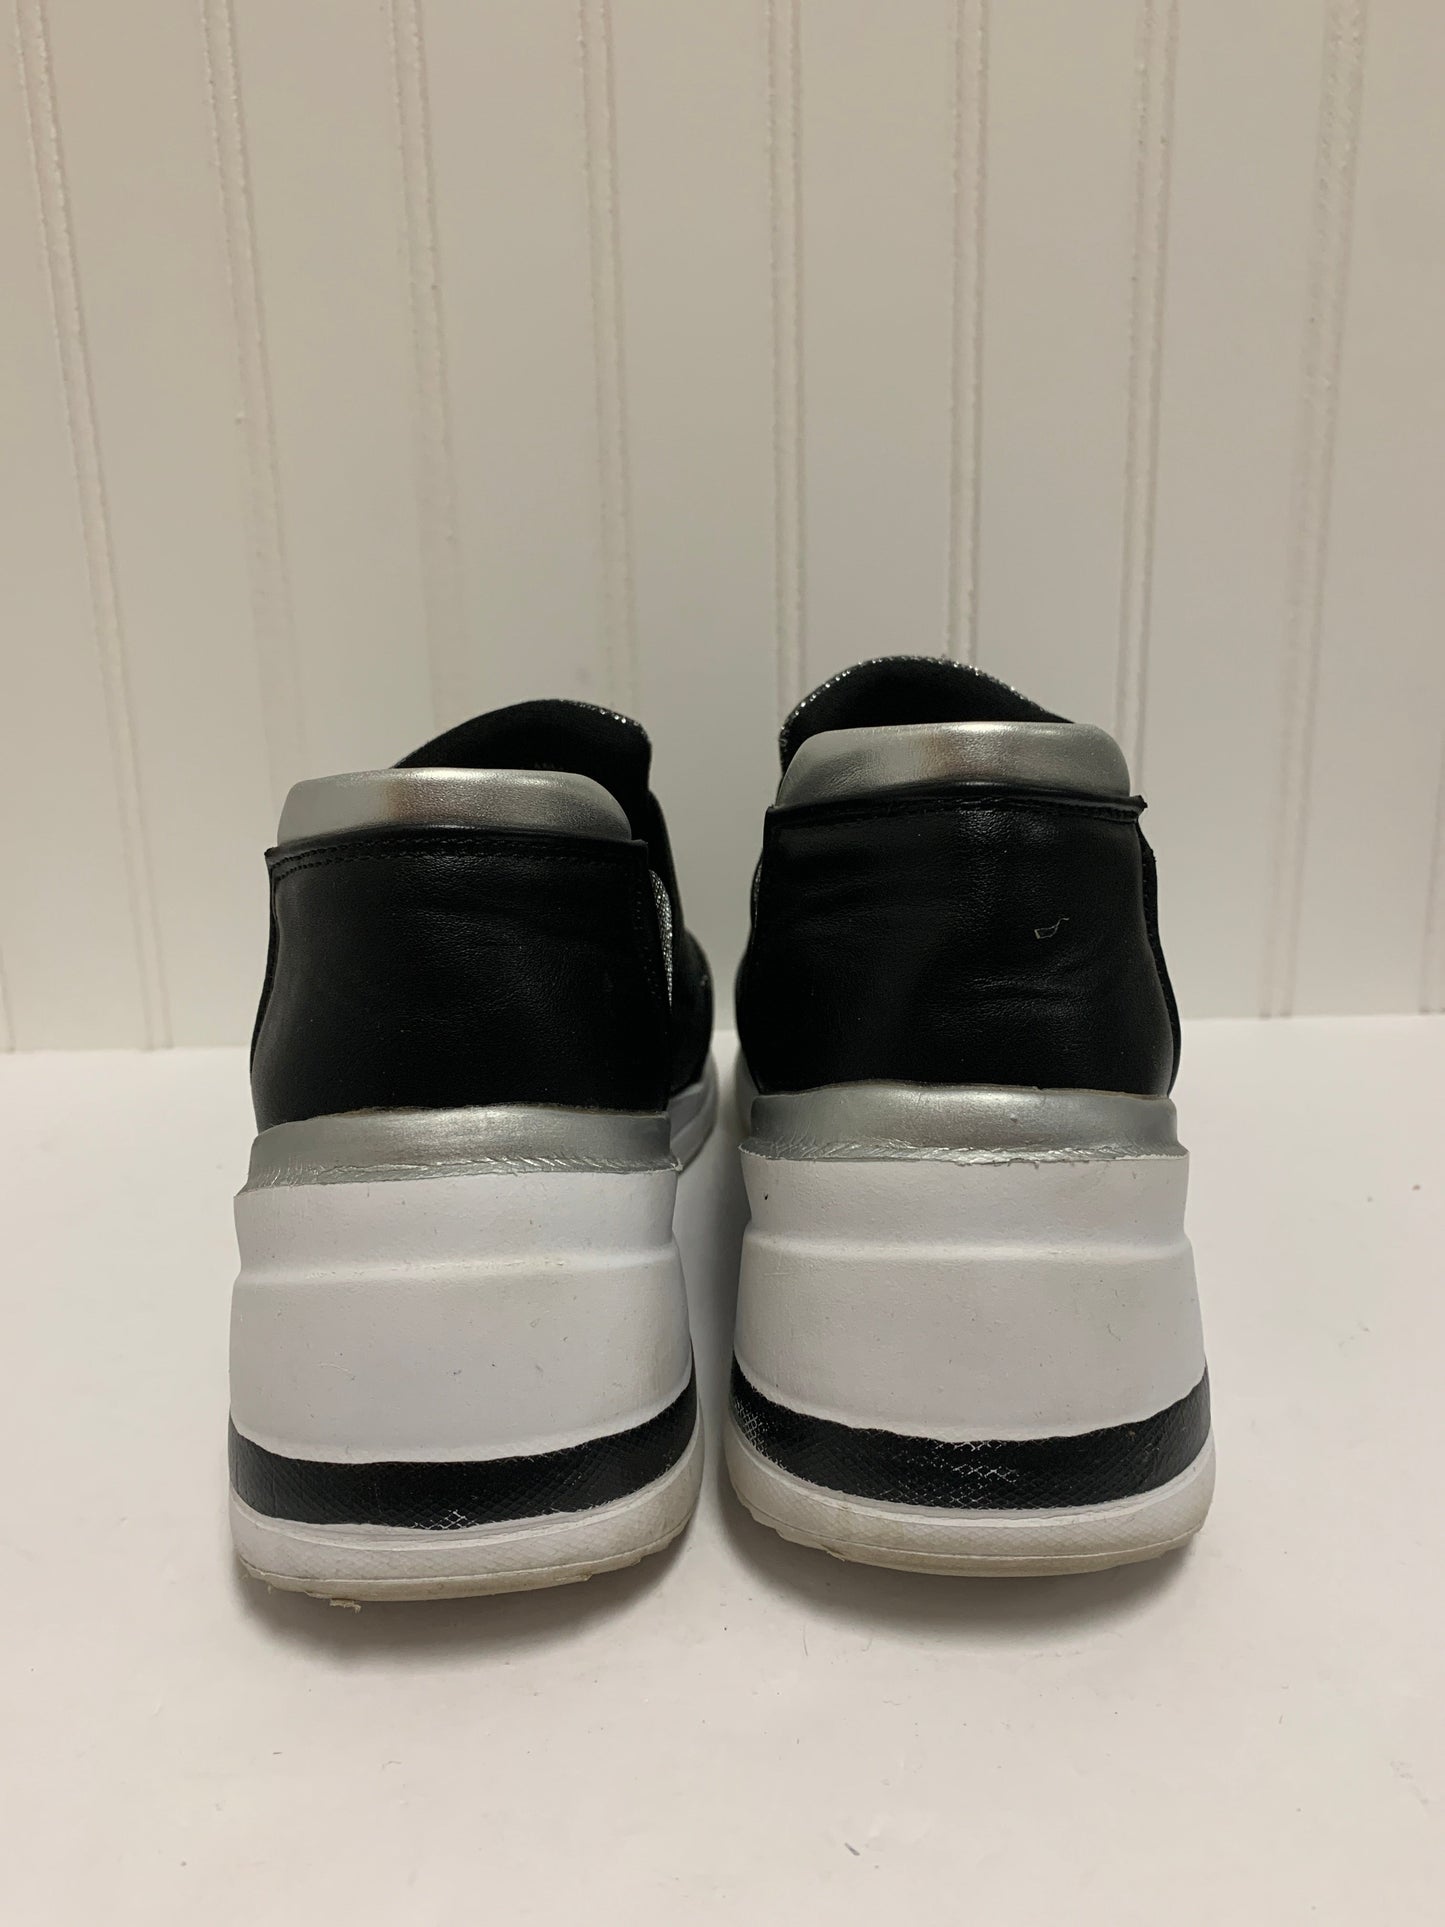 Shoes Sneakers Platform By Echo  Size: 8.5